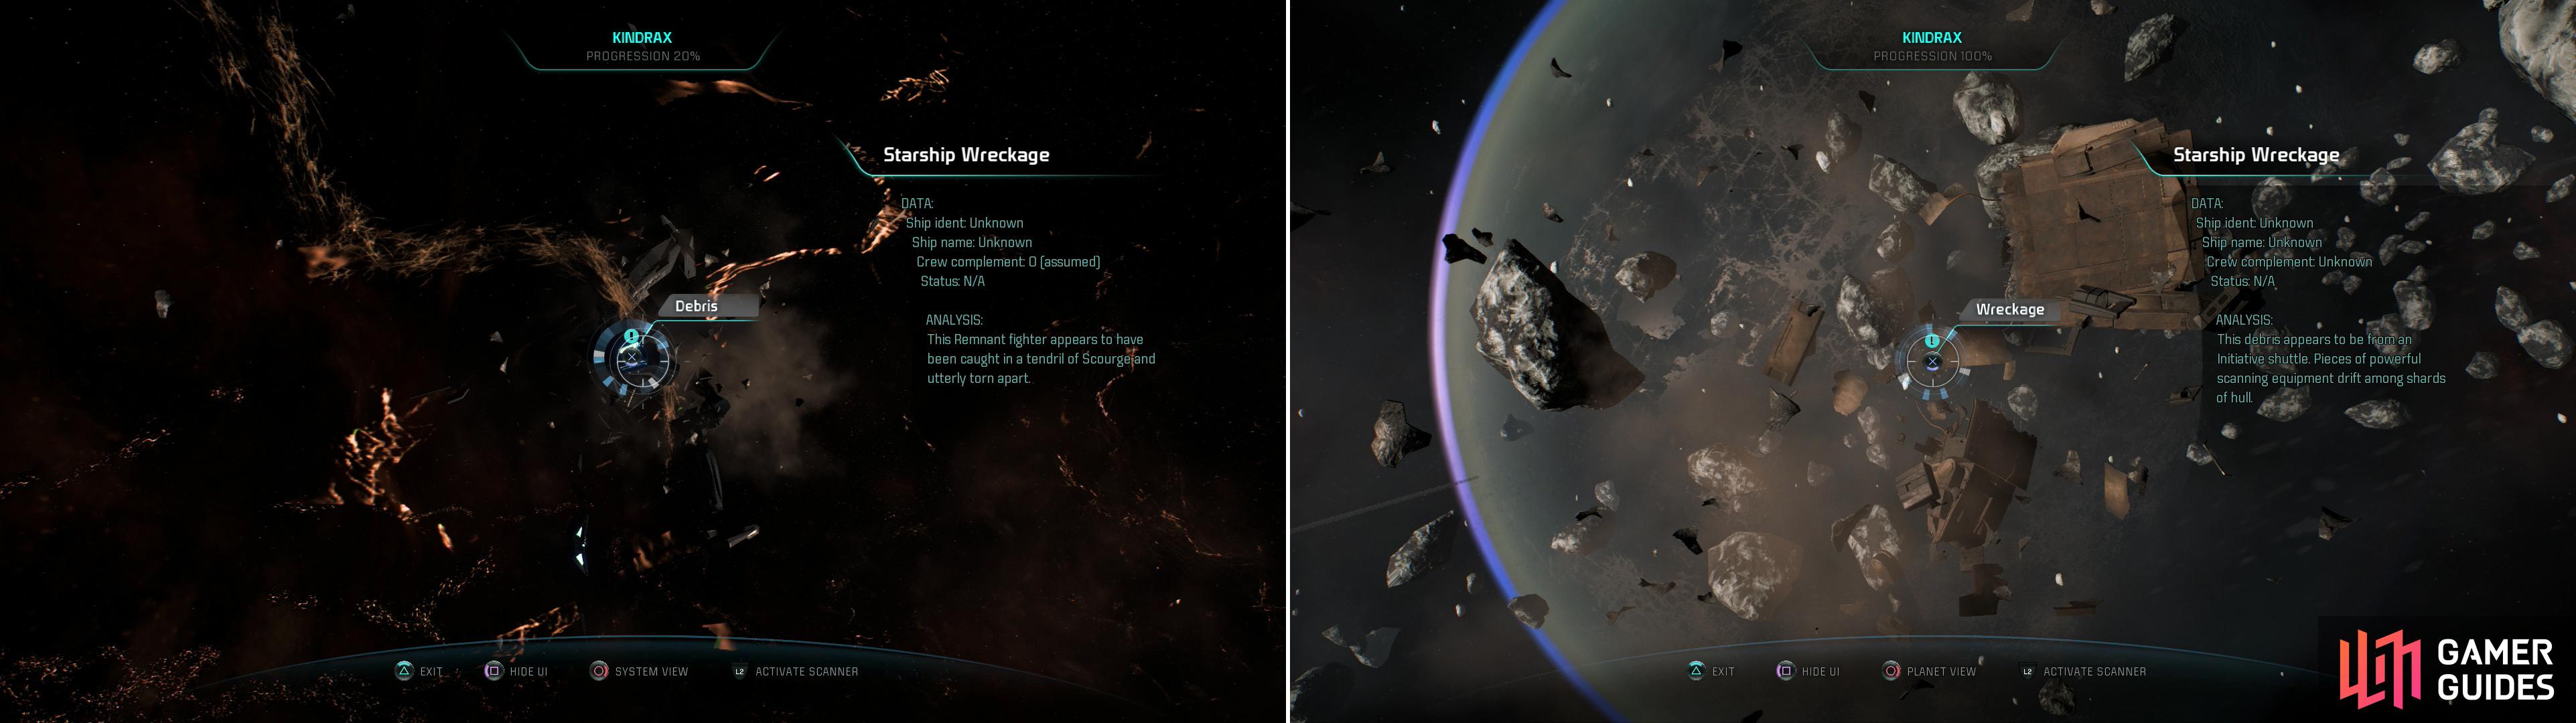 Kindrax is the death ofsStarships, as evidenced by the Remant fighter (left) and the wrecked shuttle in the ring around H-202 (right).